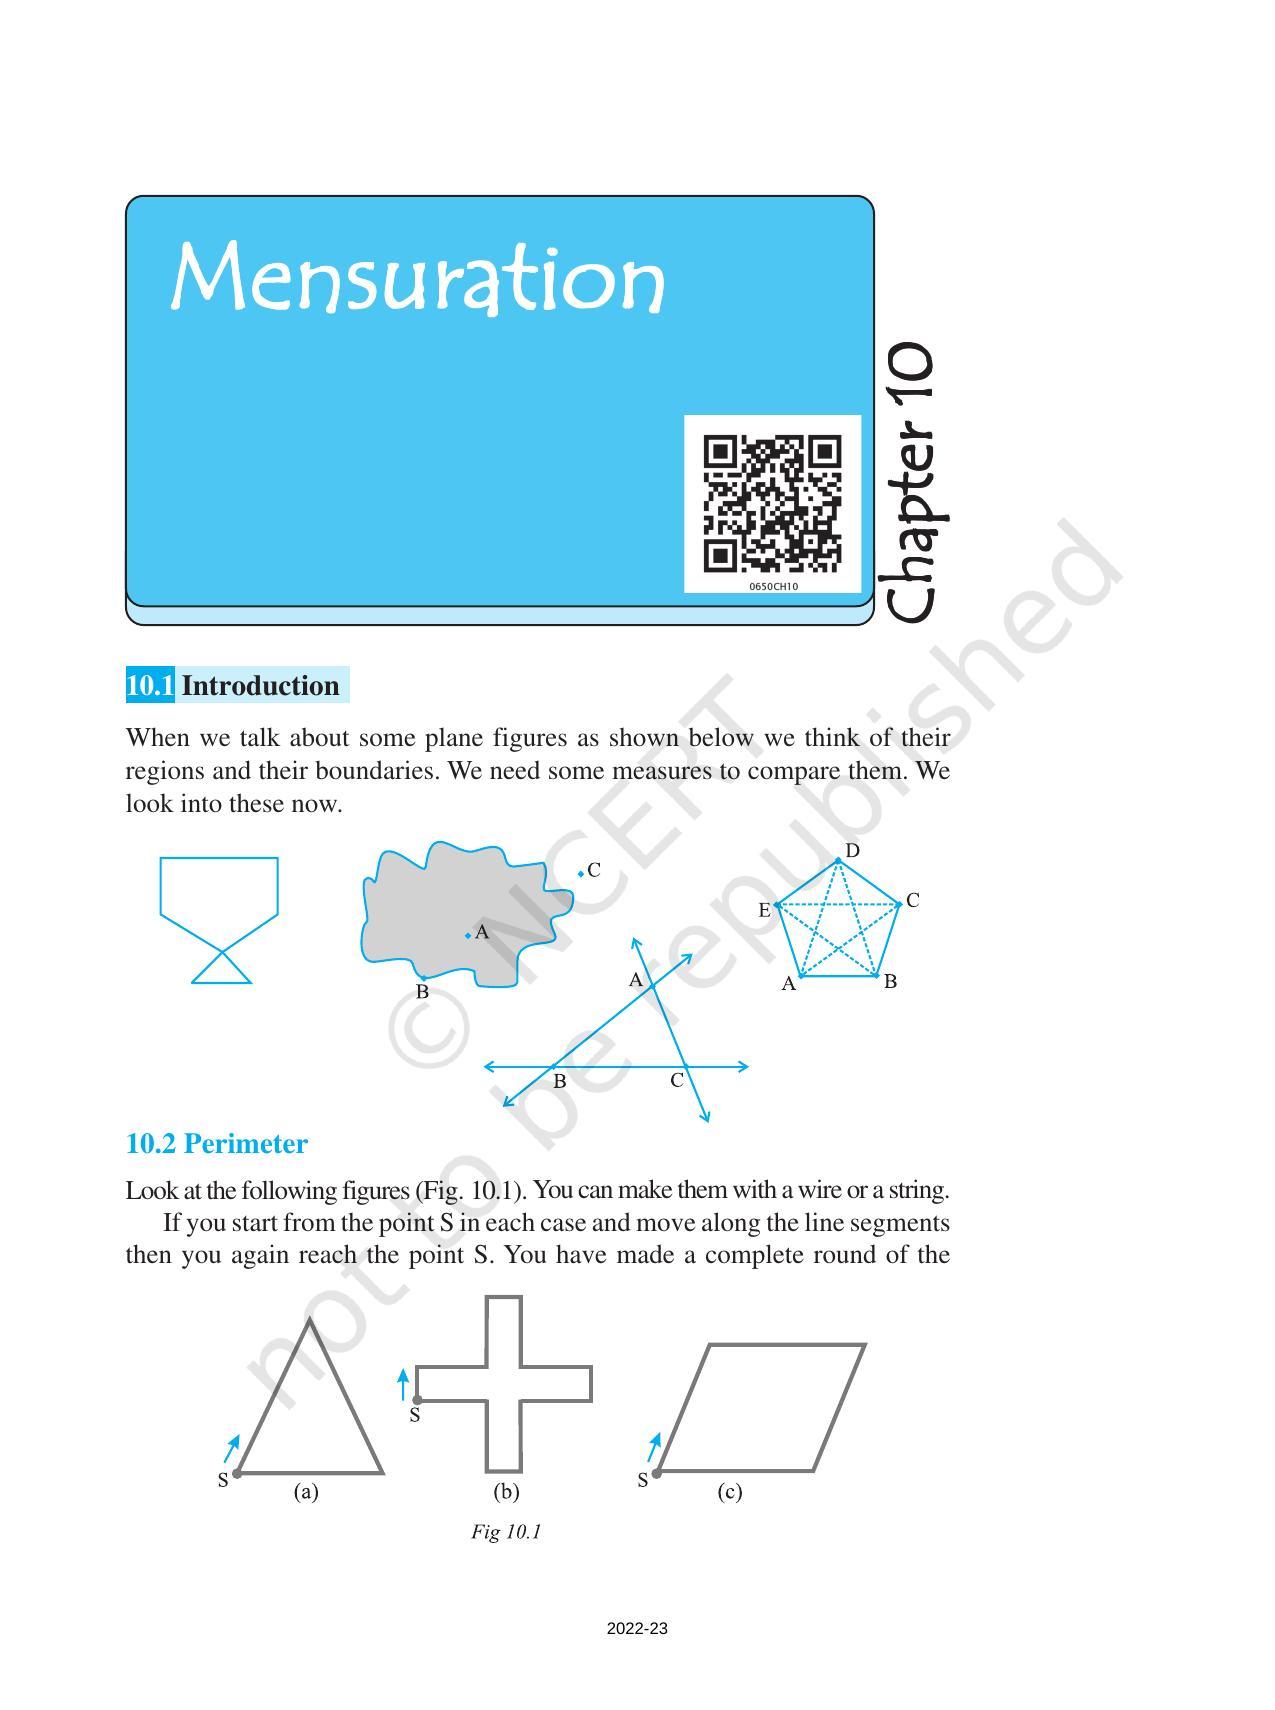 NCERT Book for Class 6 Maths: Chapter 10-Mensuration - Page 1